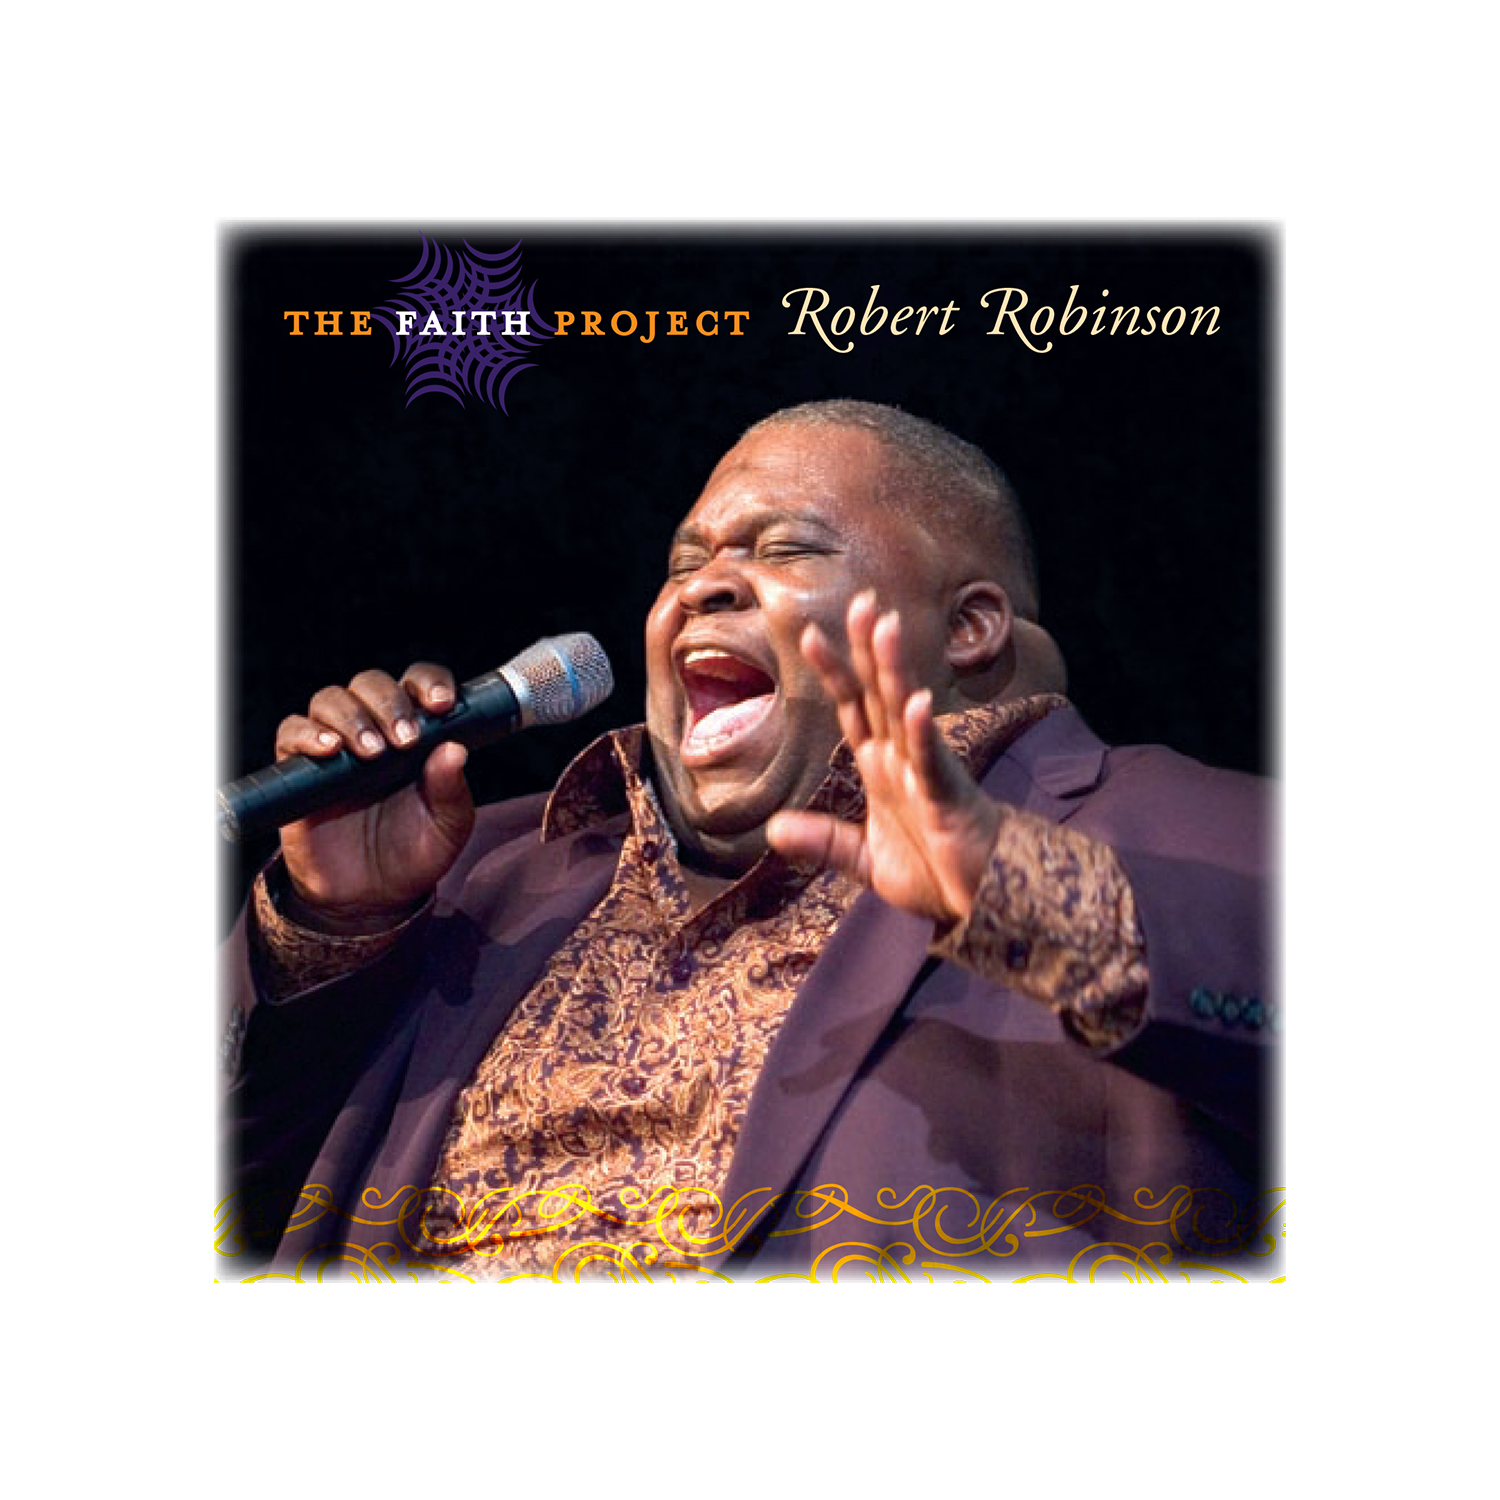   The Faith Project  cd cover featuring Robert Robinson 